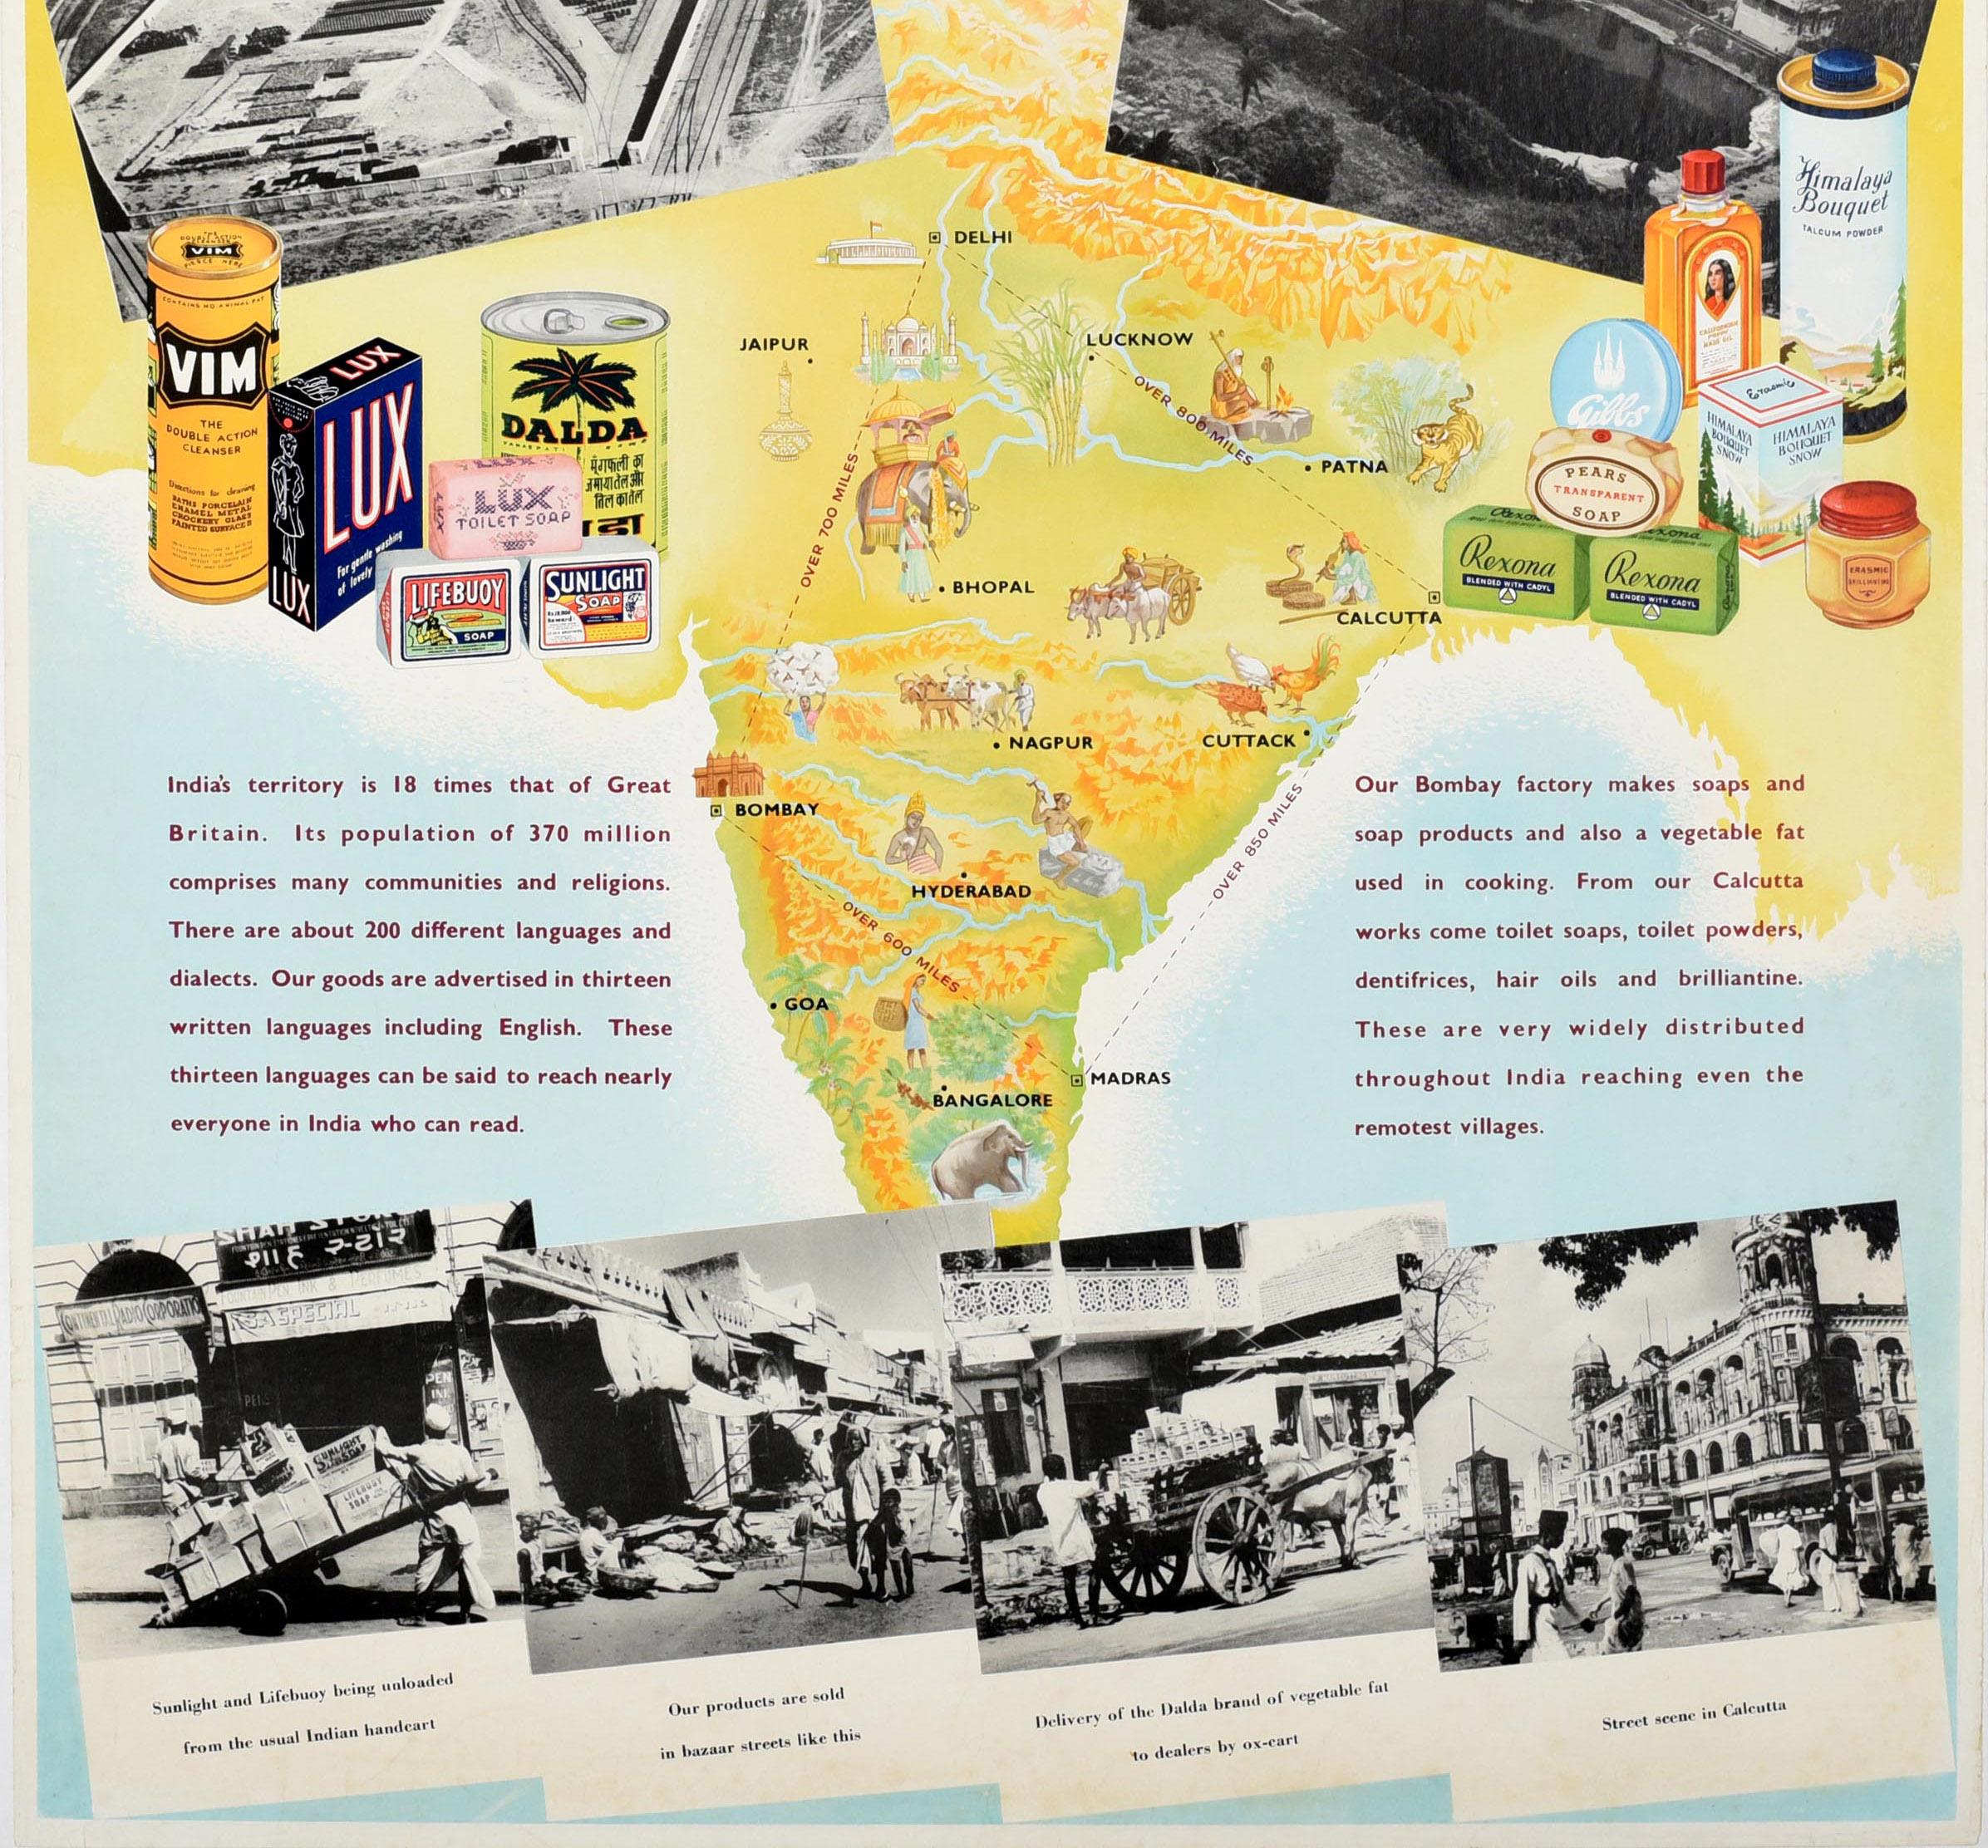 Original Vintage Advertising Poster Unilever Overseas India Illustrated Map - Beige Print by Unknown